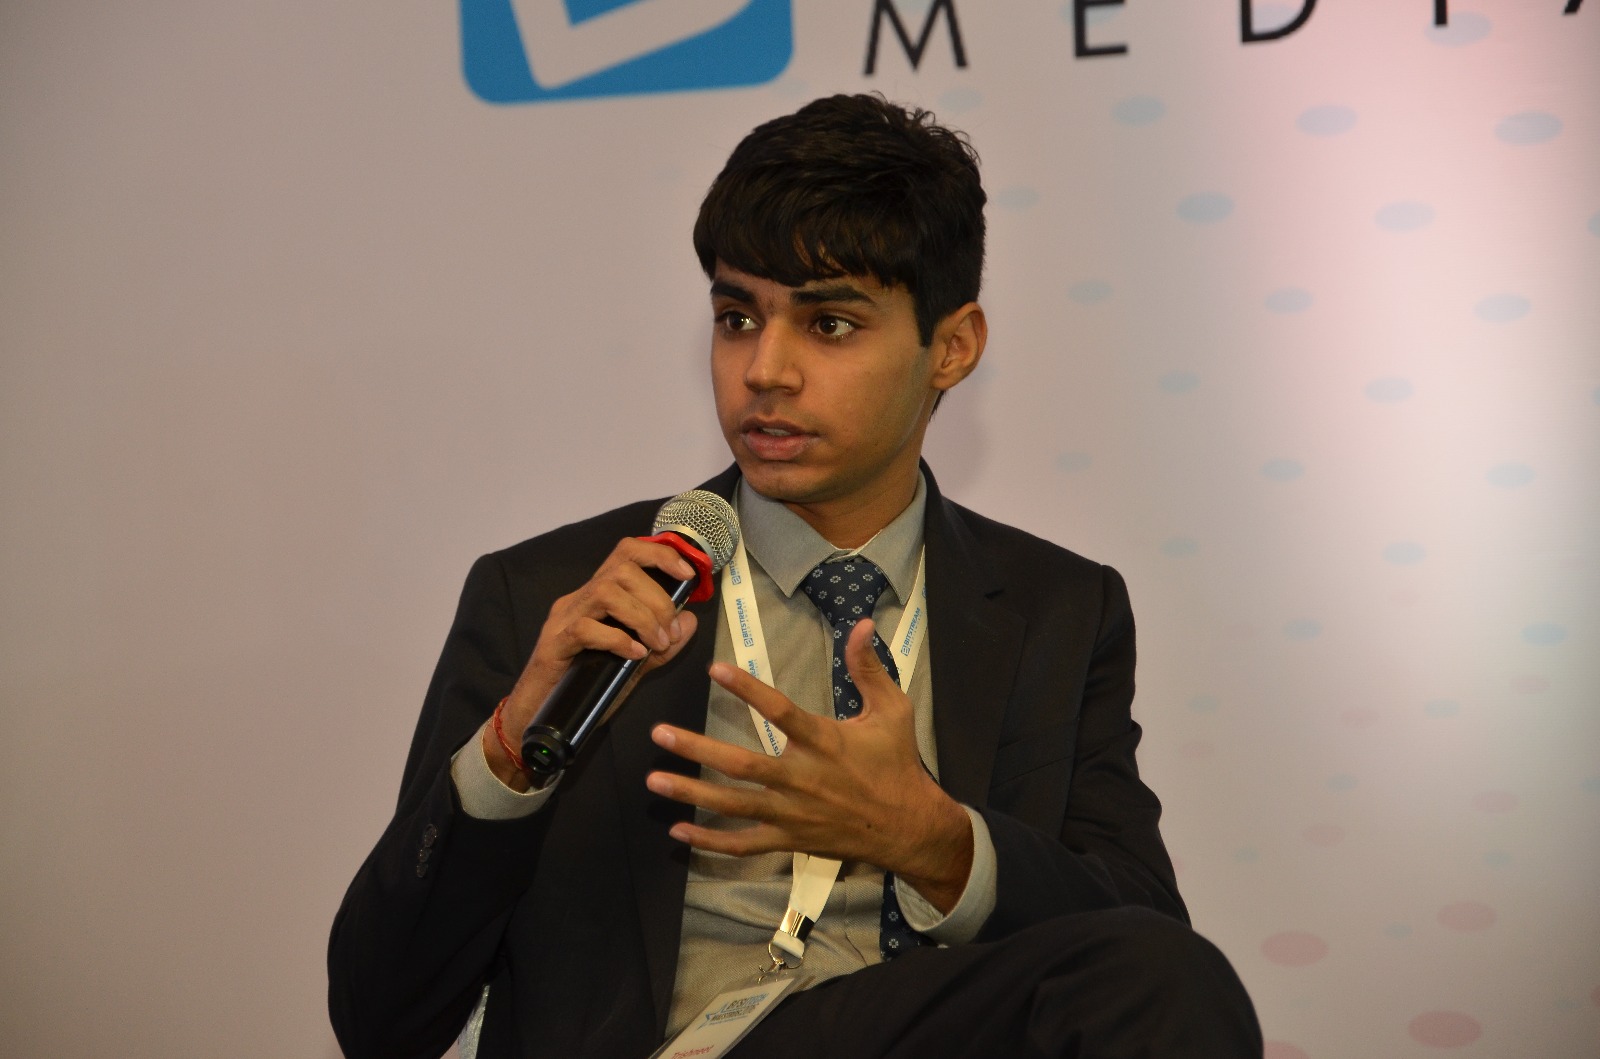 mr-trishneet-arora-ceo-tac-security-as-one-of-the-panelists-among-an-expert-panel-at-the-bfsi-tech-maestros-award_